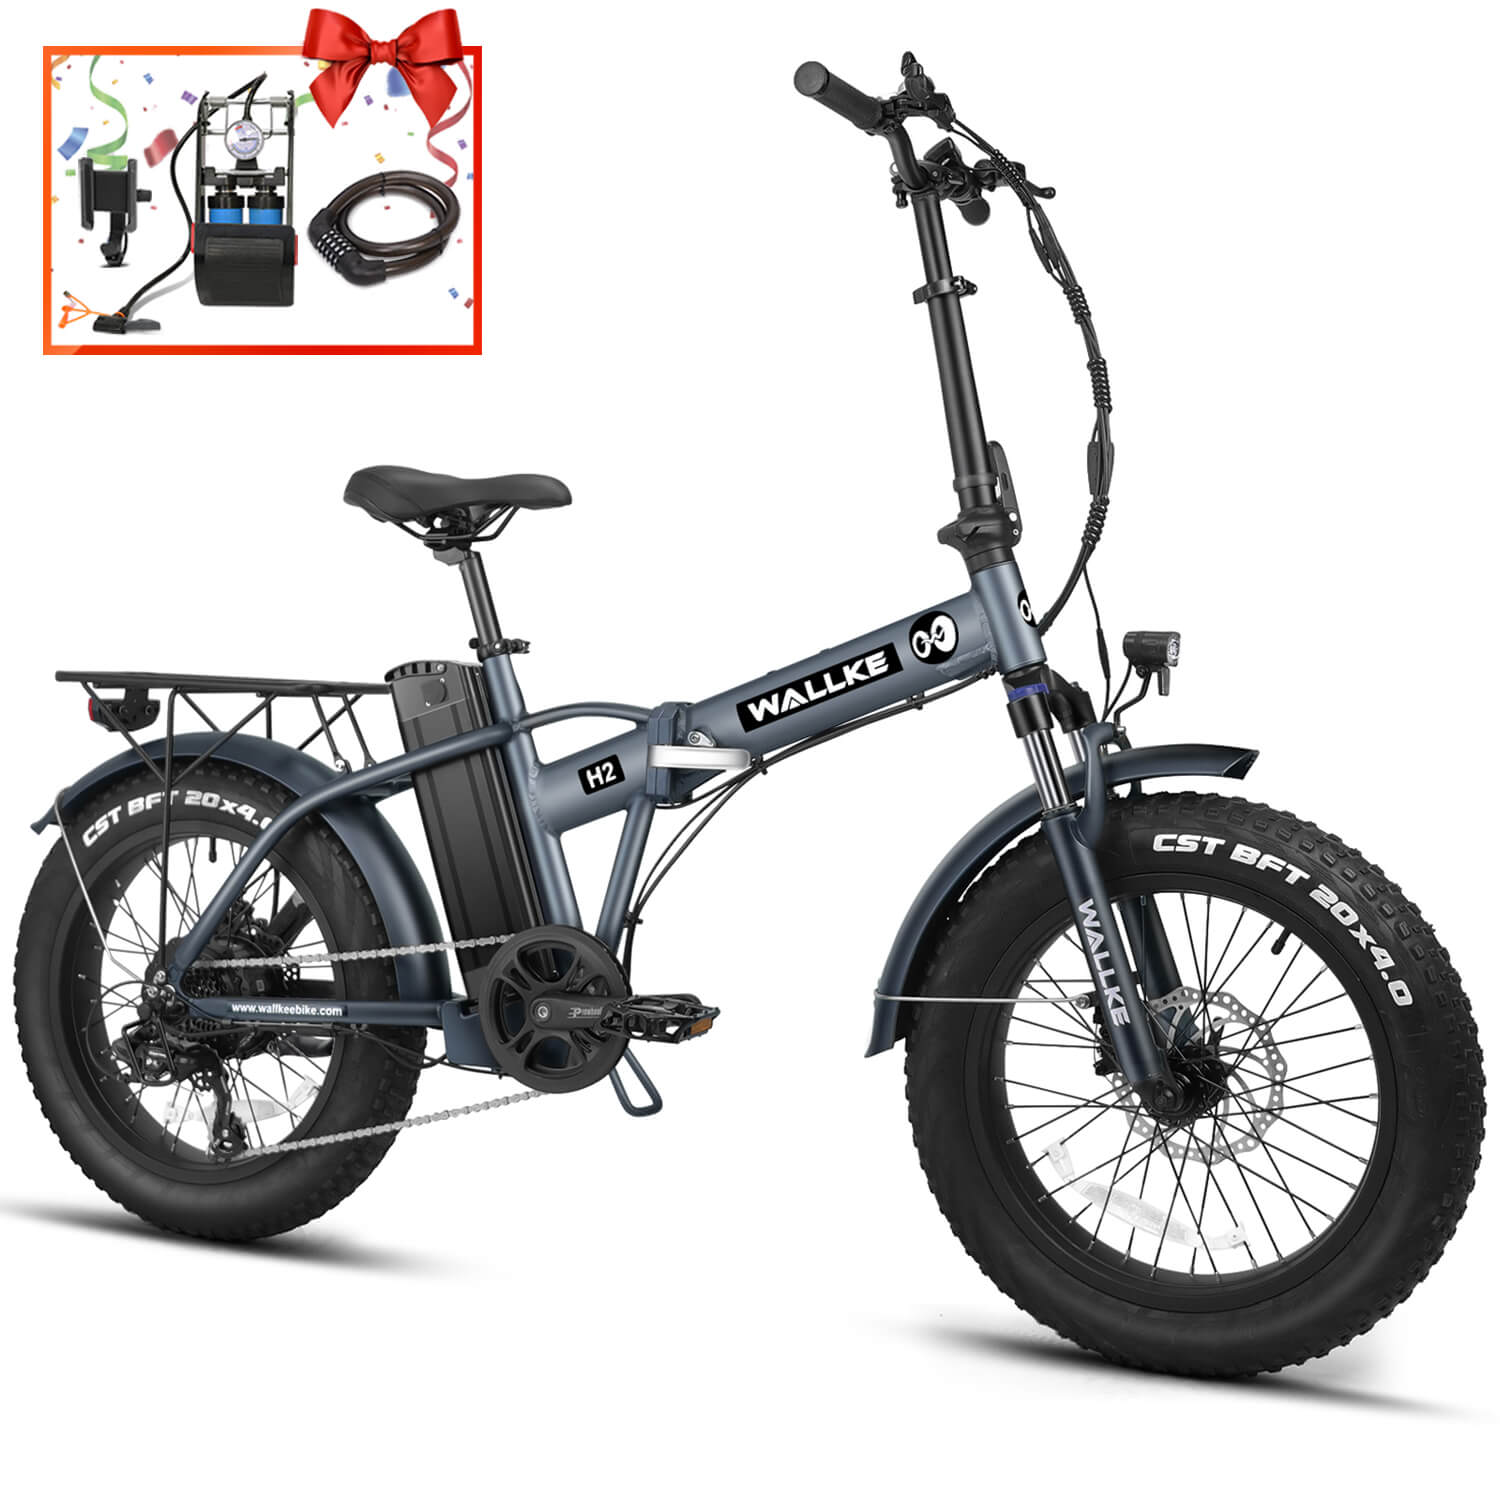 wallke e-bike F2 All Terrain Fat Tires.They are designed for durability and safety for dense snow, water, soft sand and regular cycling activities. No need to find parking spot or be stuck in traffic for hours.